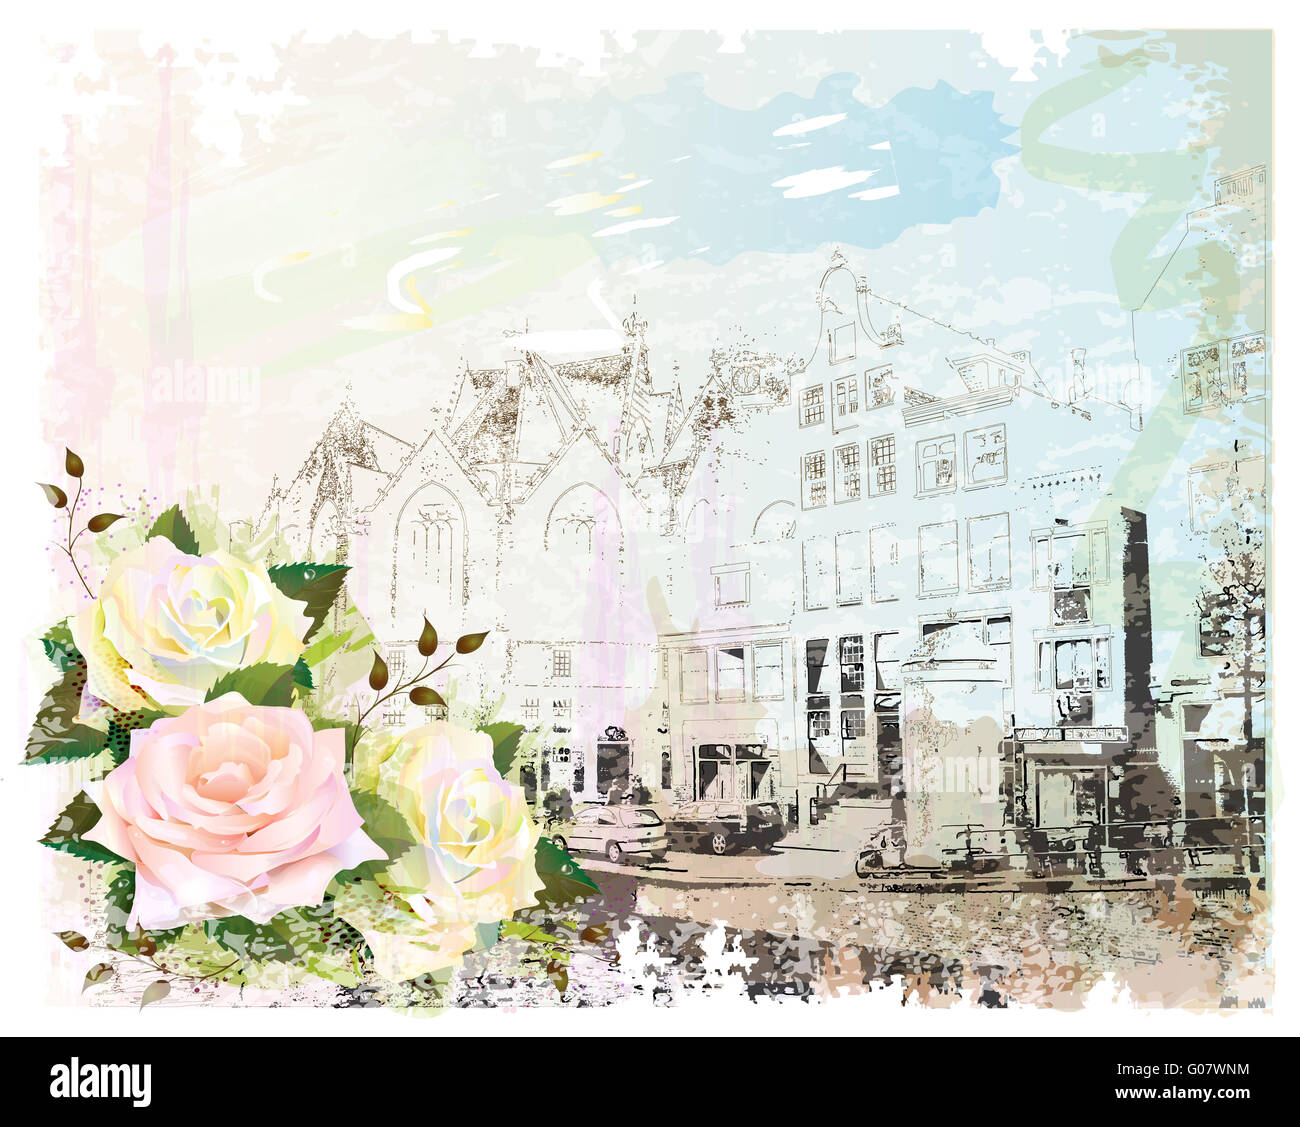 vintage illustration of Amsterdam street and roses. Watercolor style. Stock Photo